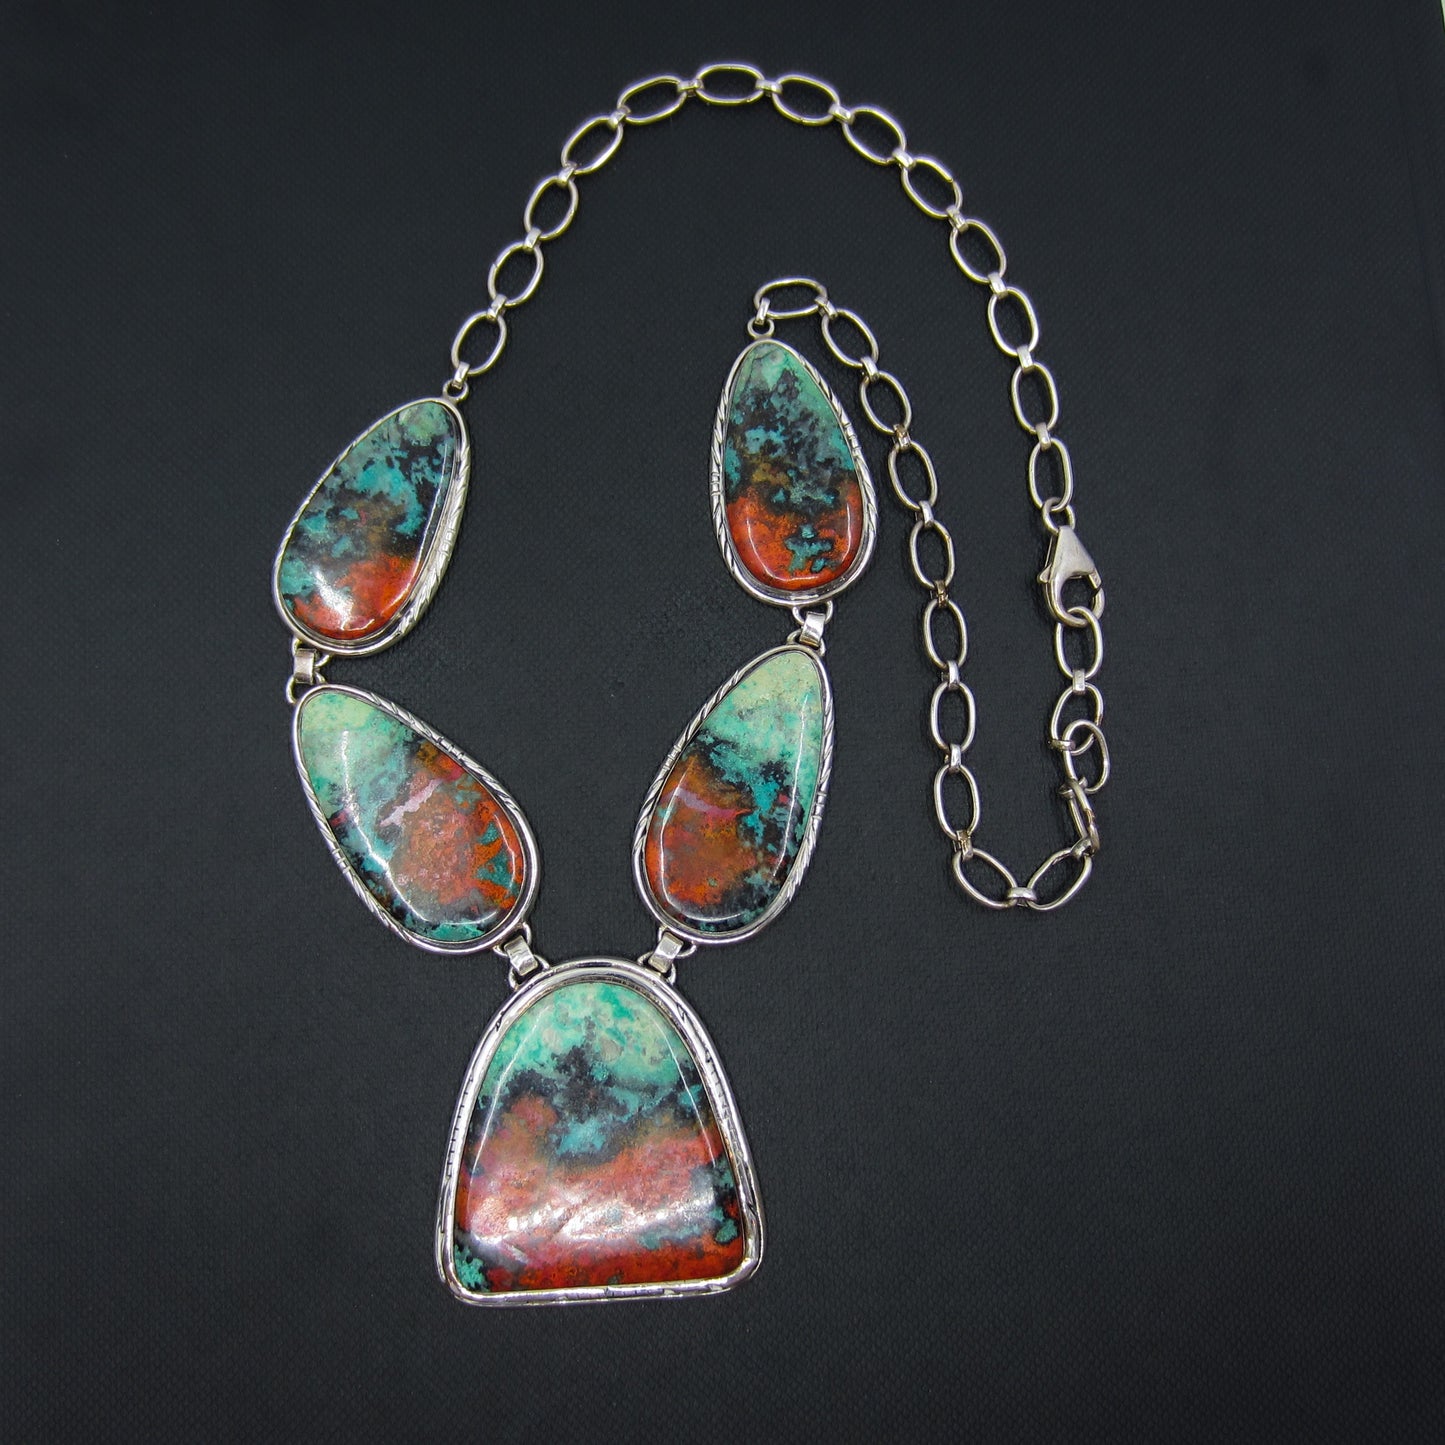 Vintage Navajo Turquoise Drop Necklace Sterling, James Shay c. 1980